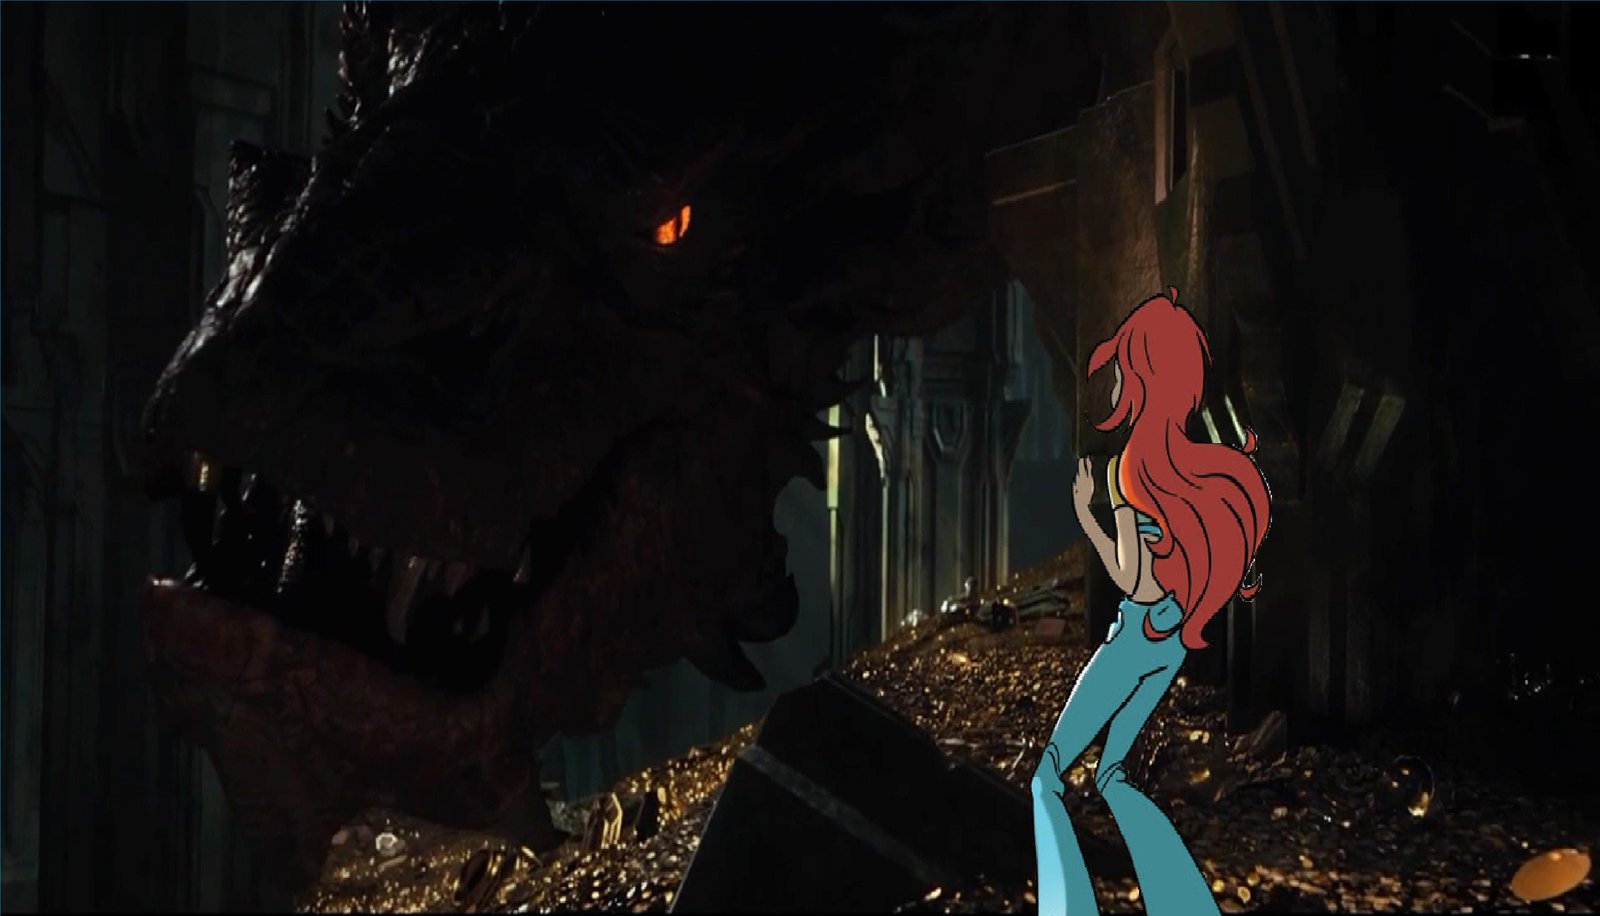 Bloom Encounters Smaug In The Neverending Story By Dragonfire92379